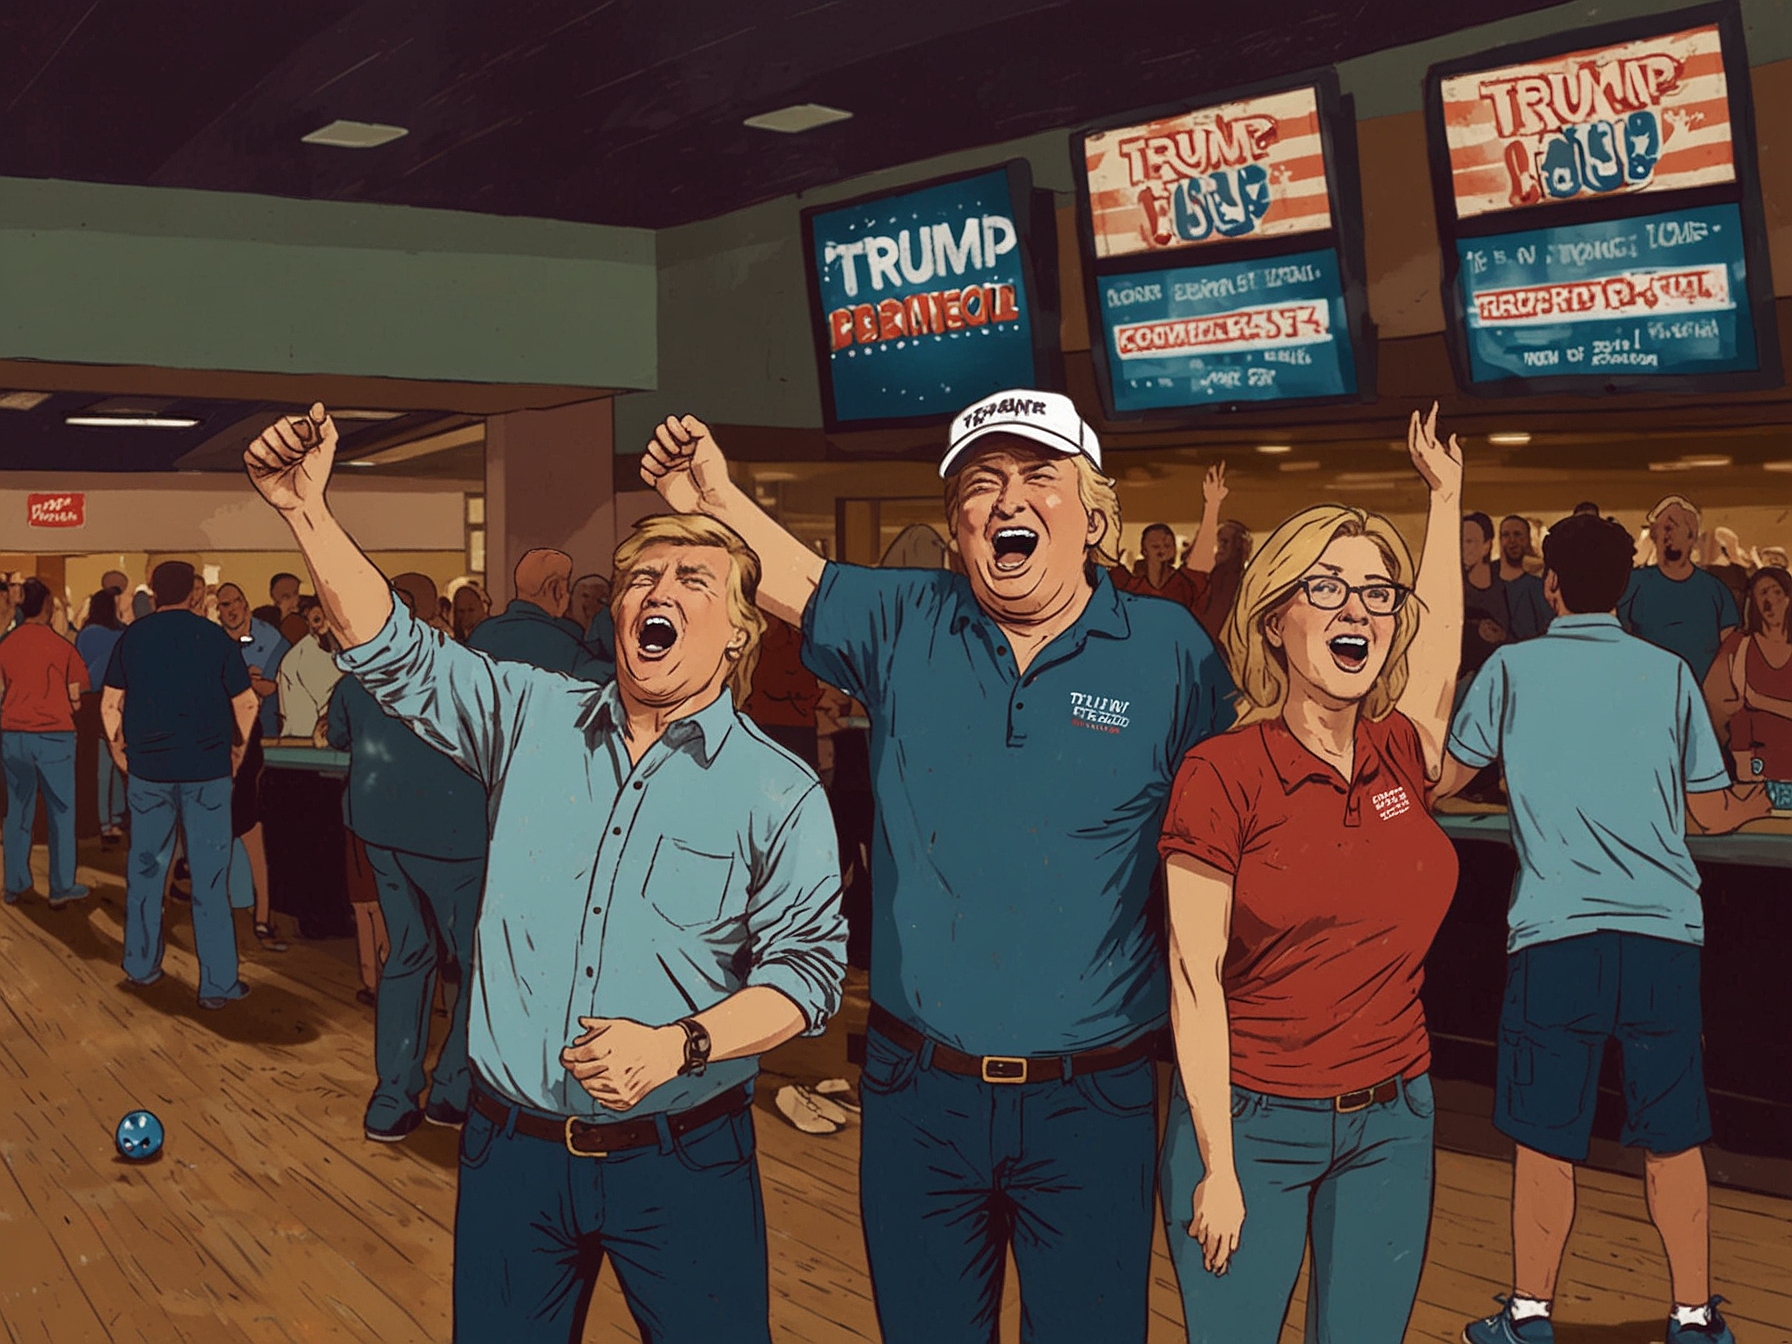 Trump supporters celebrating in a bowling alley as they watch the debate. The scene captures their enthusiasm and the perceived victory of their candidate, highlighting the polarized reactions.